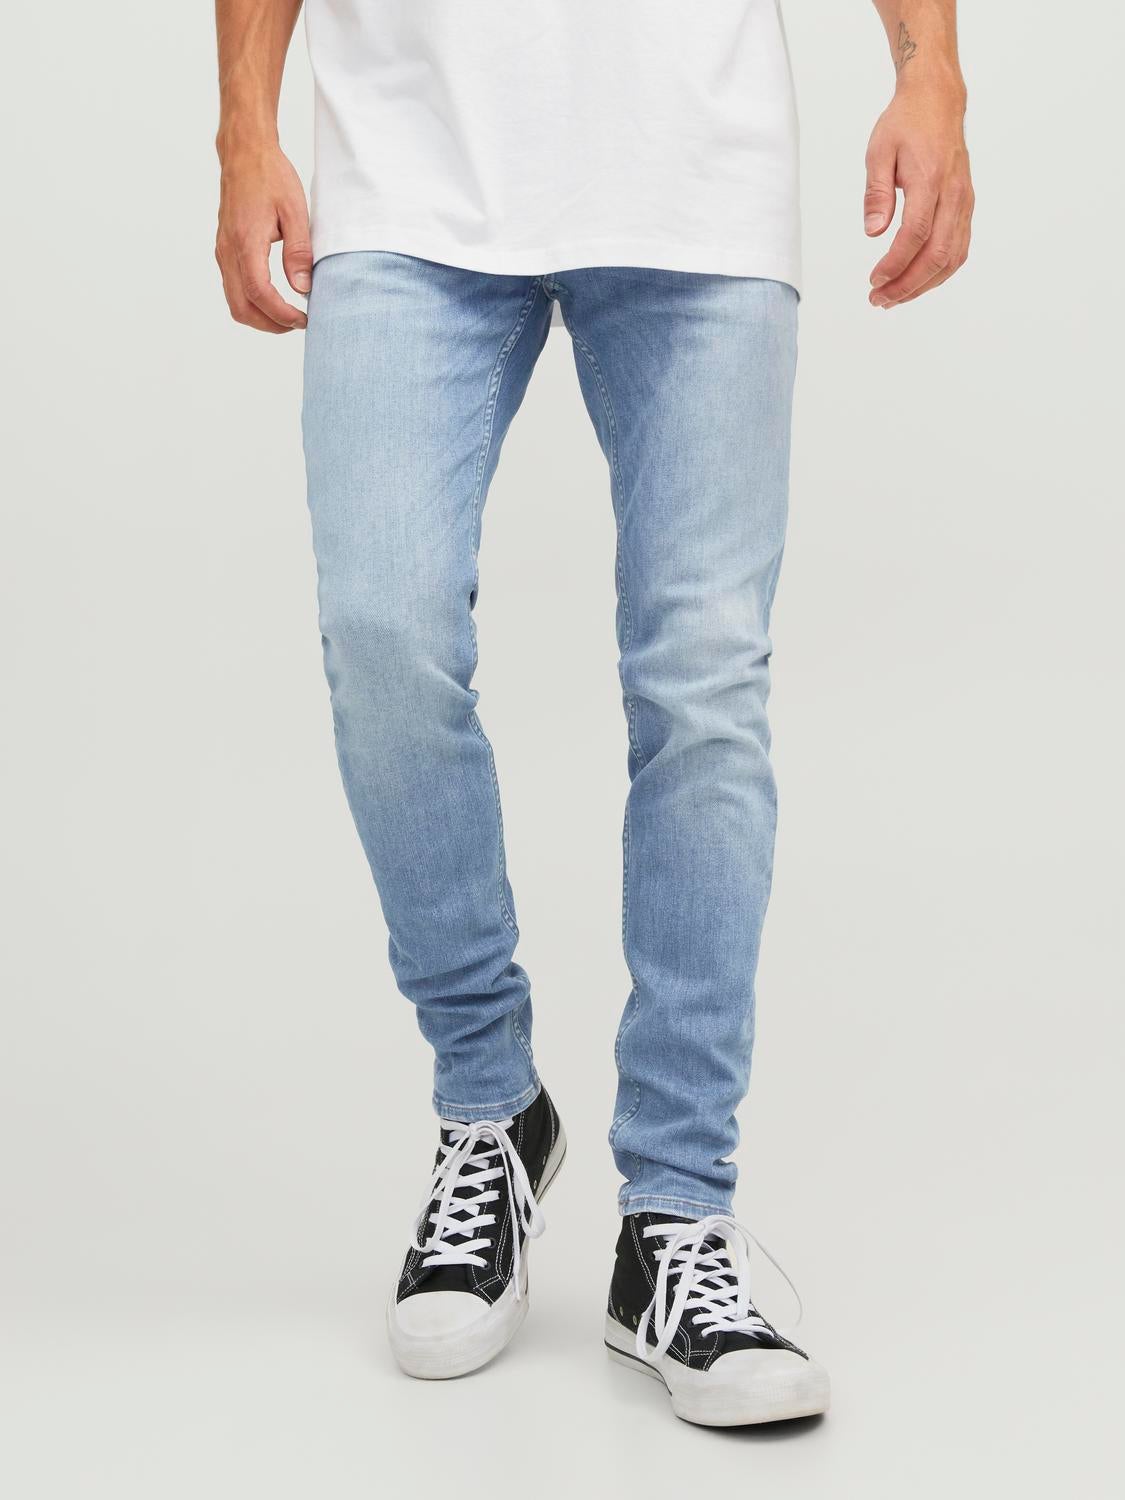 PacSun Medium Biker Ripped Stacked Skinny Jeans | PacSun